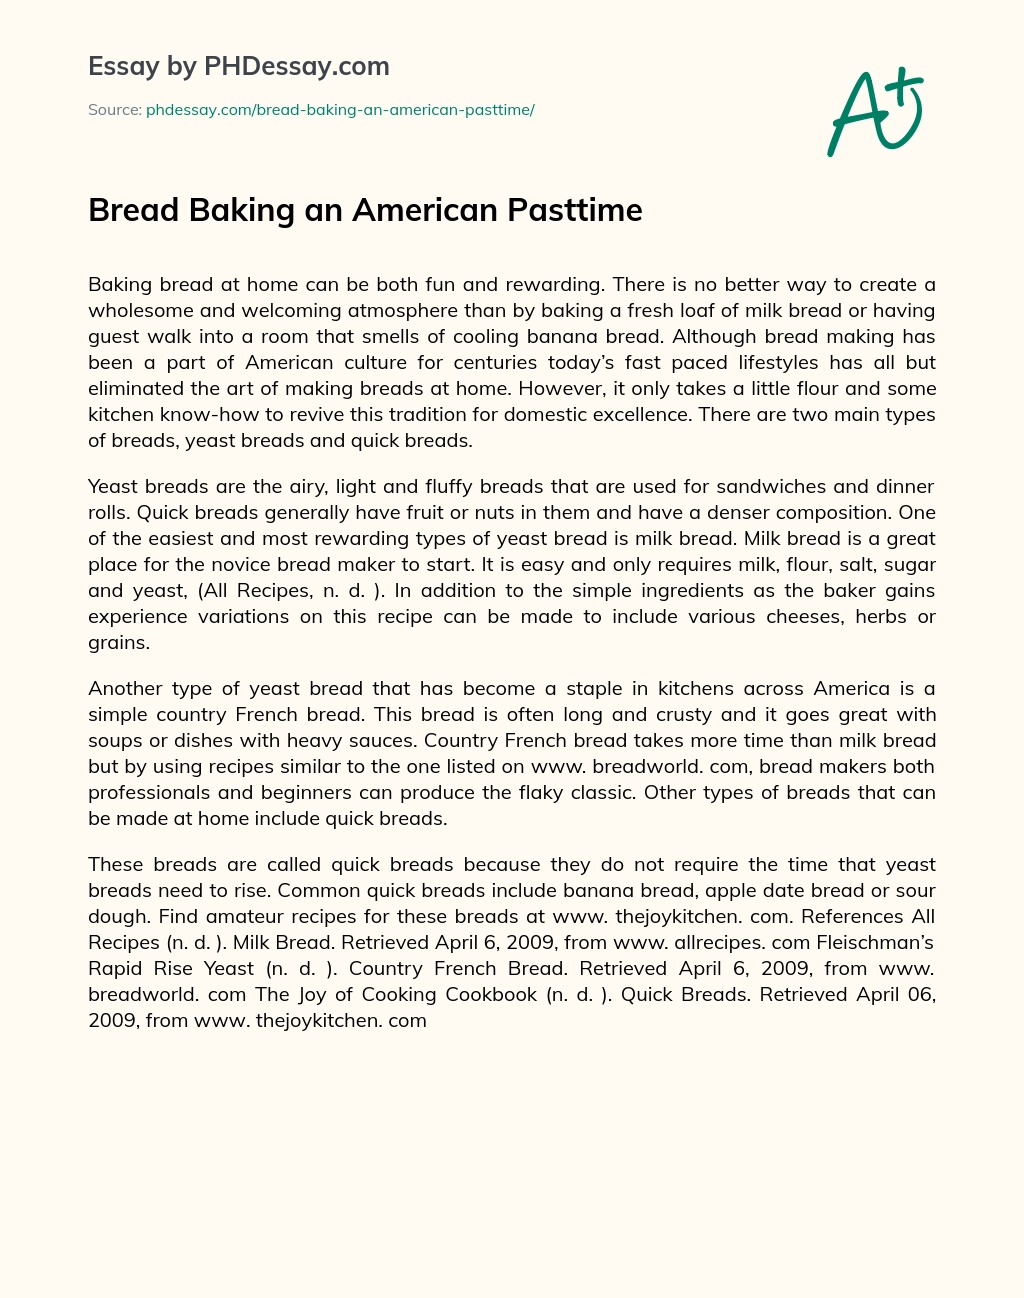 Bread Baking an American Pasttime essay